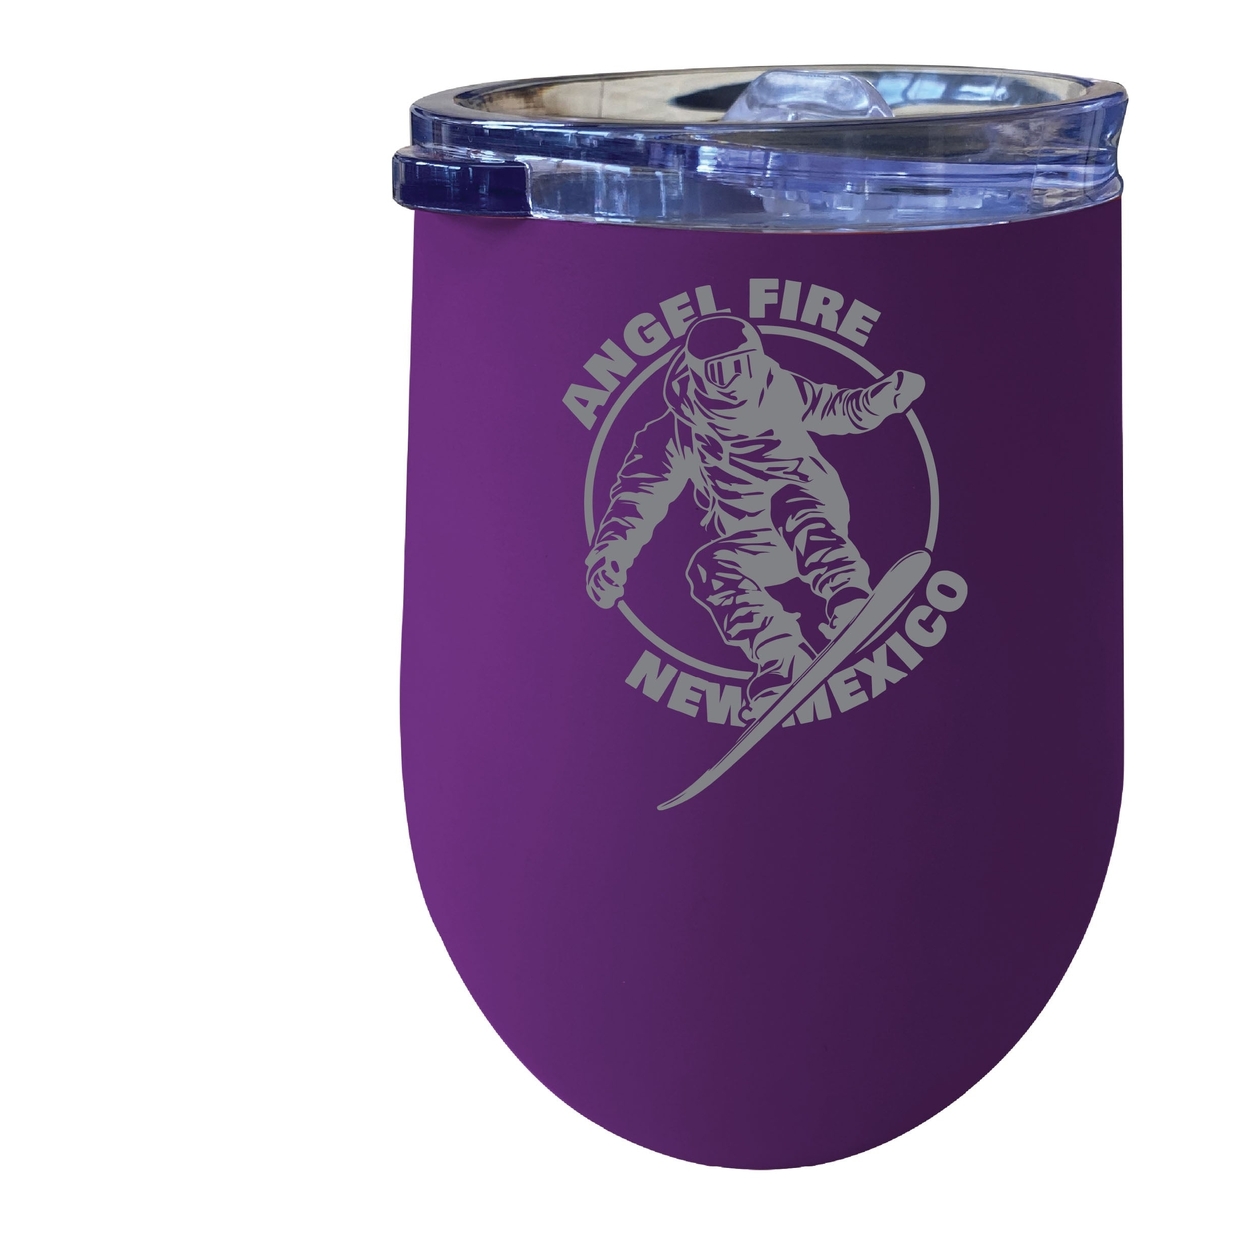 Angel Fire New Mexico Souvenir 12 Oz Engraved Insulated Wine Stainless Steel Tumbler - Purple,,2-Pack